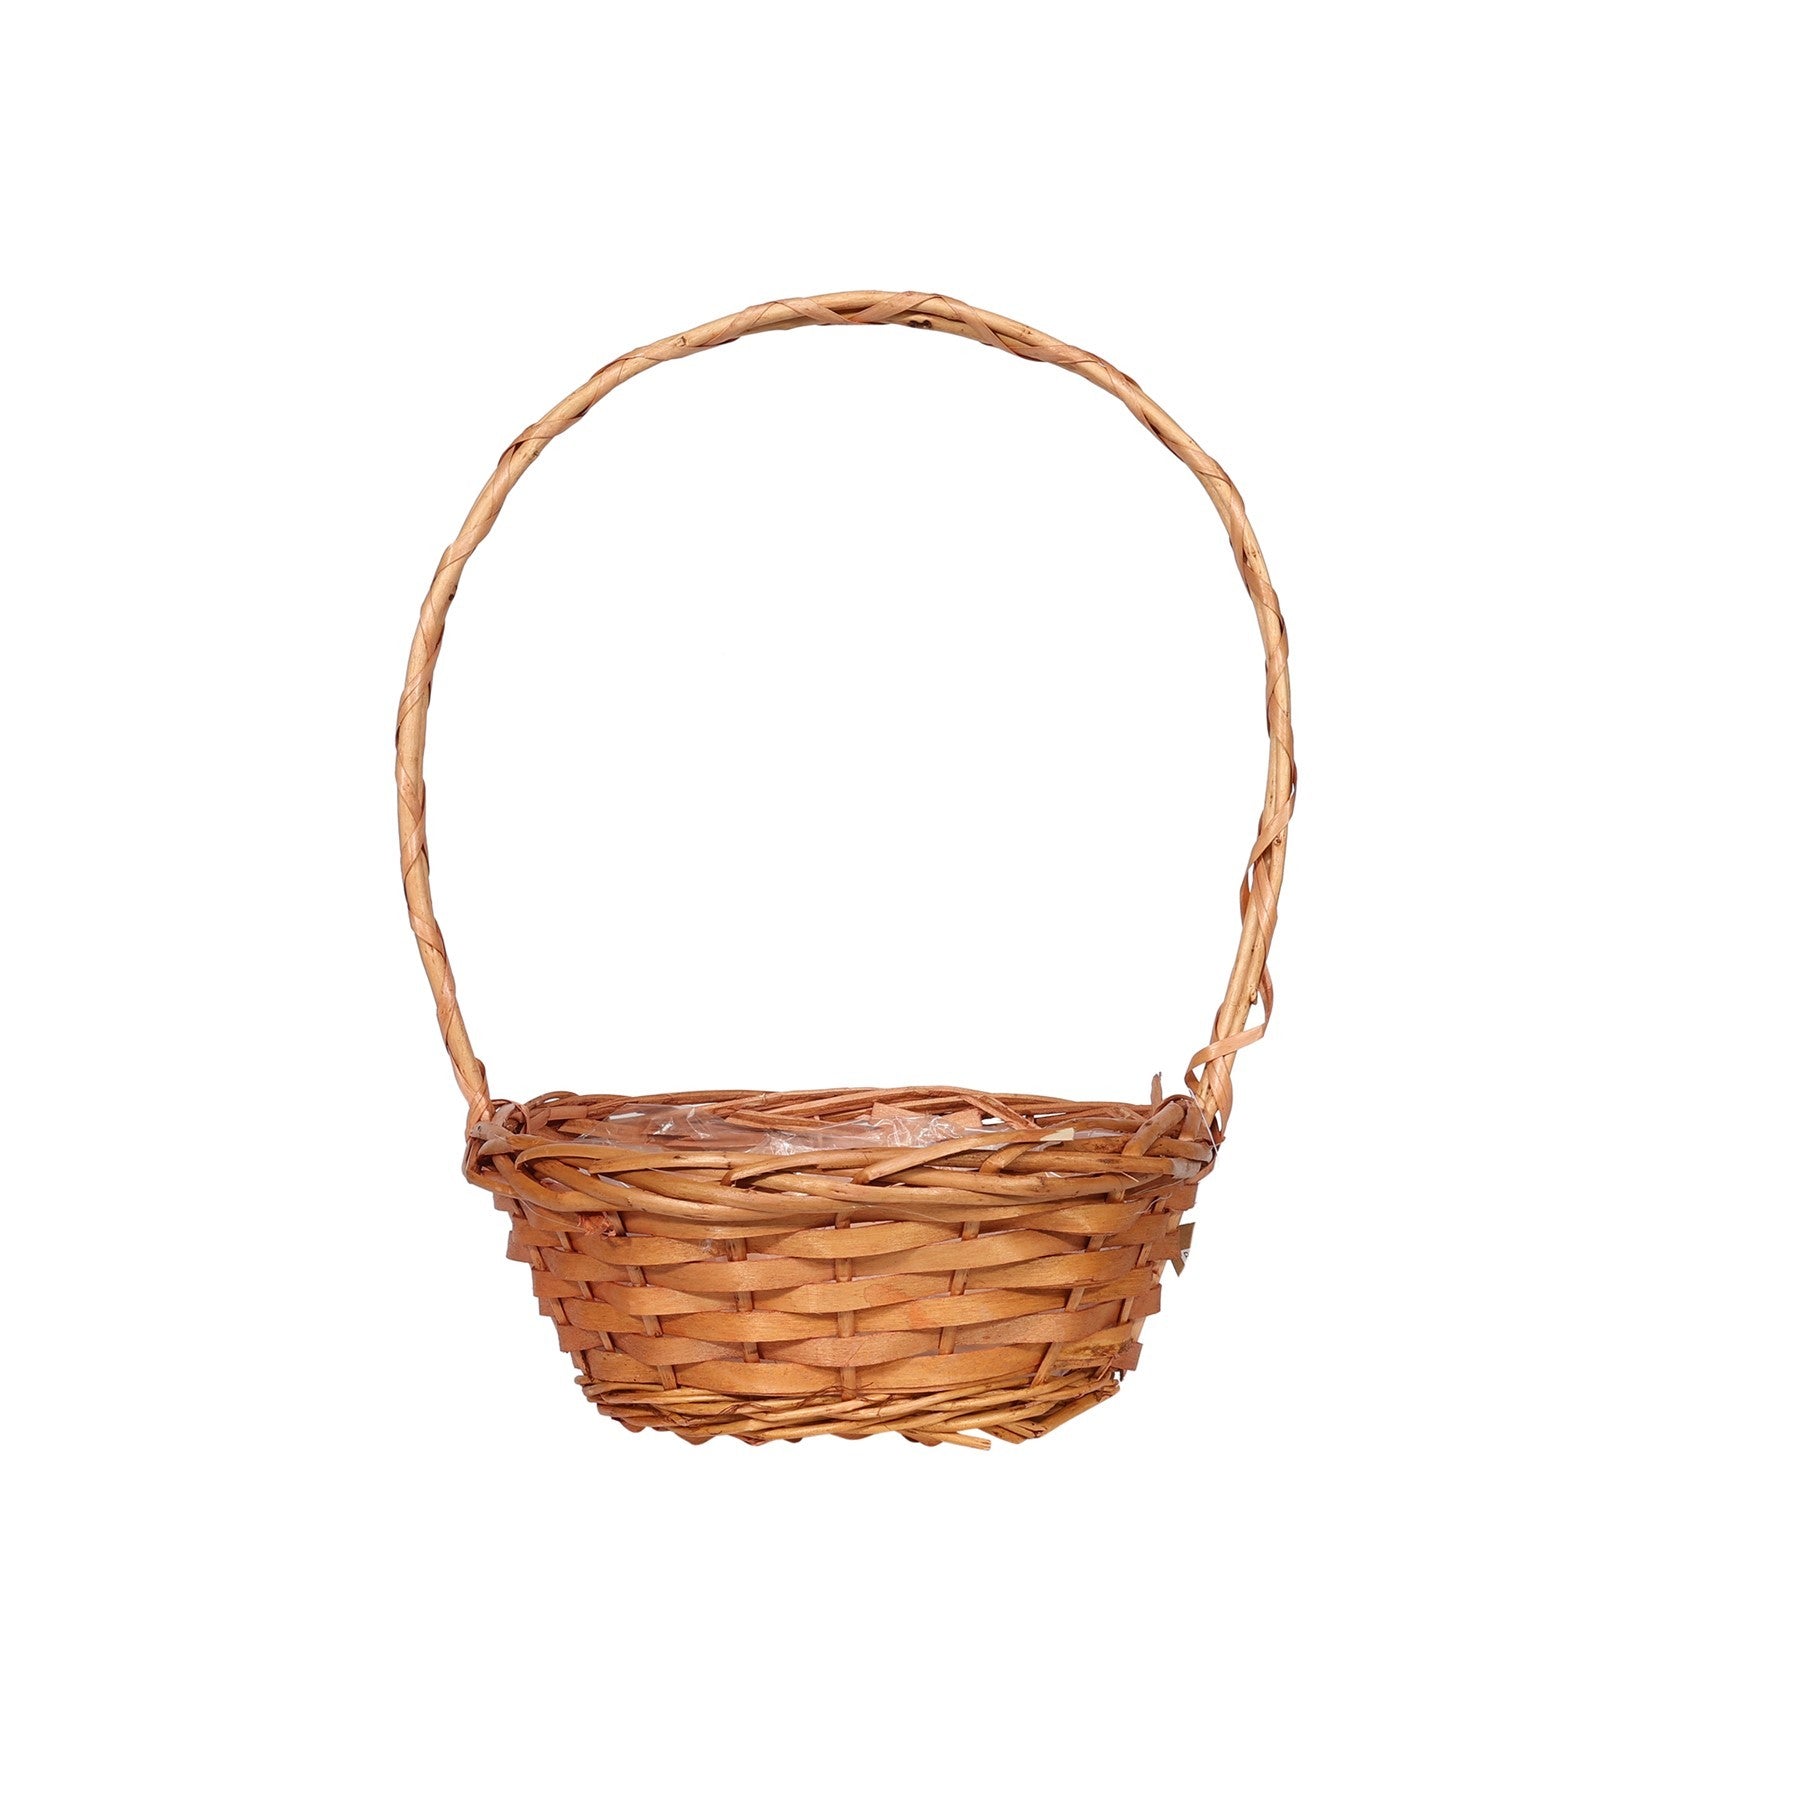 View Hollywood Basket 10inch information